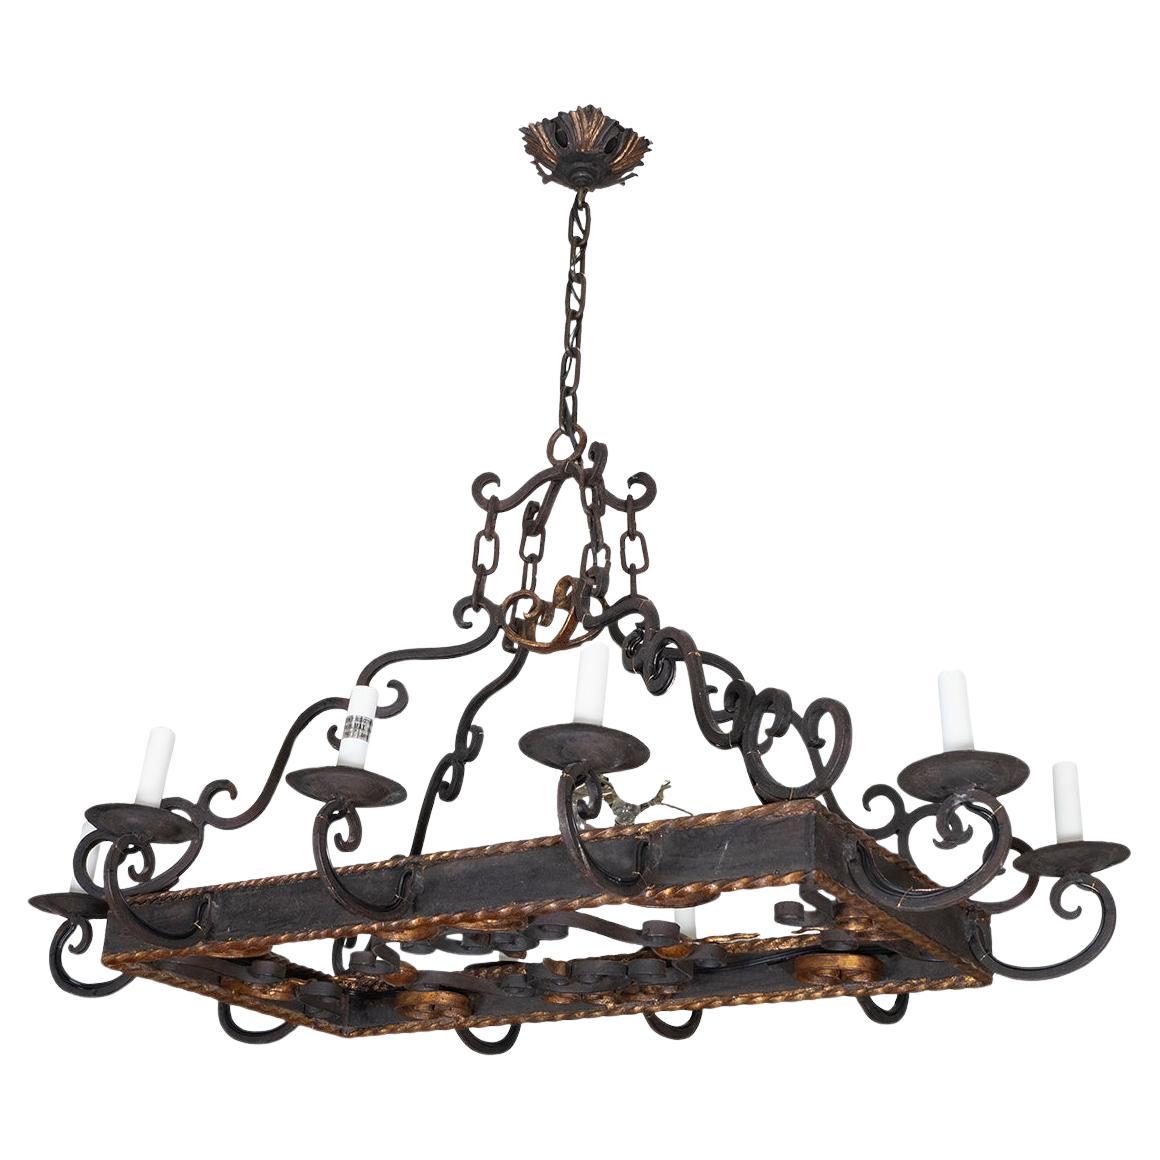 Rectangular wrought iron chandelier For Sale